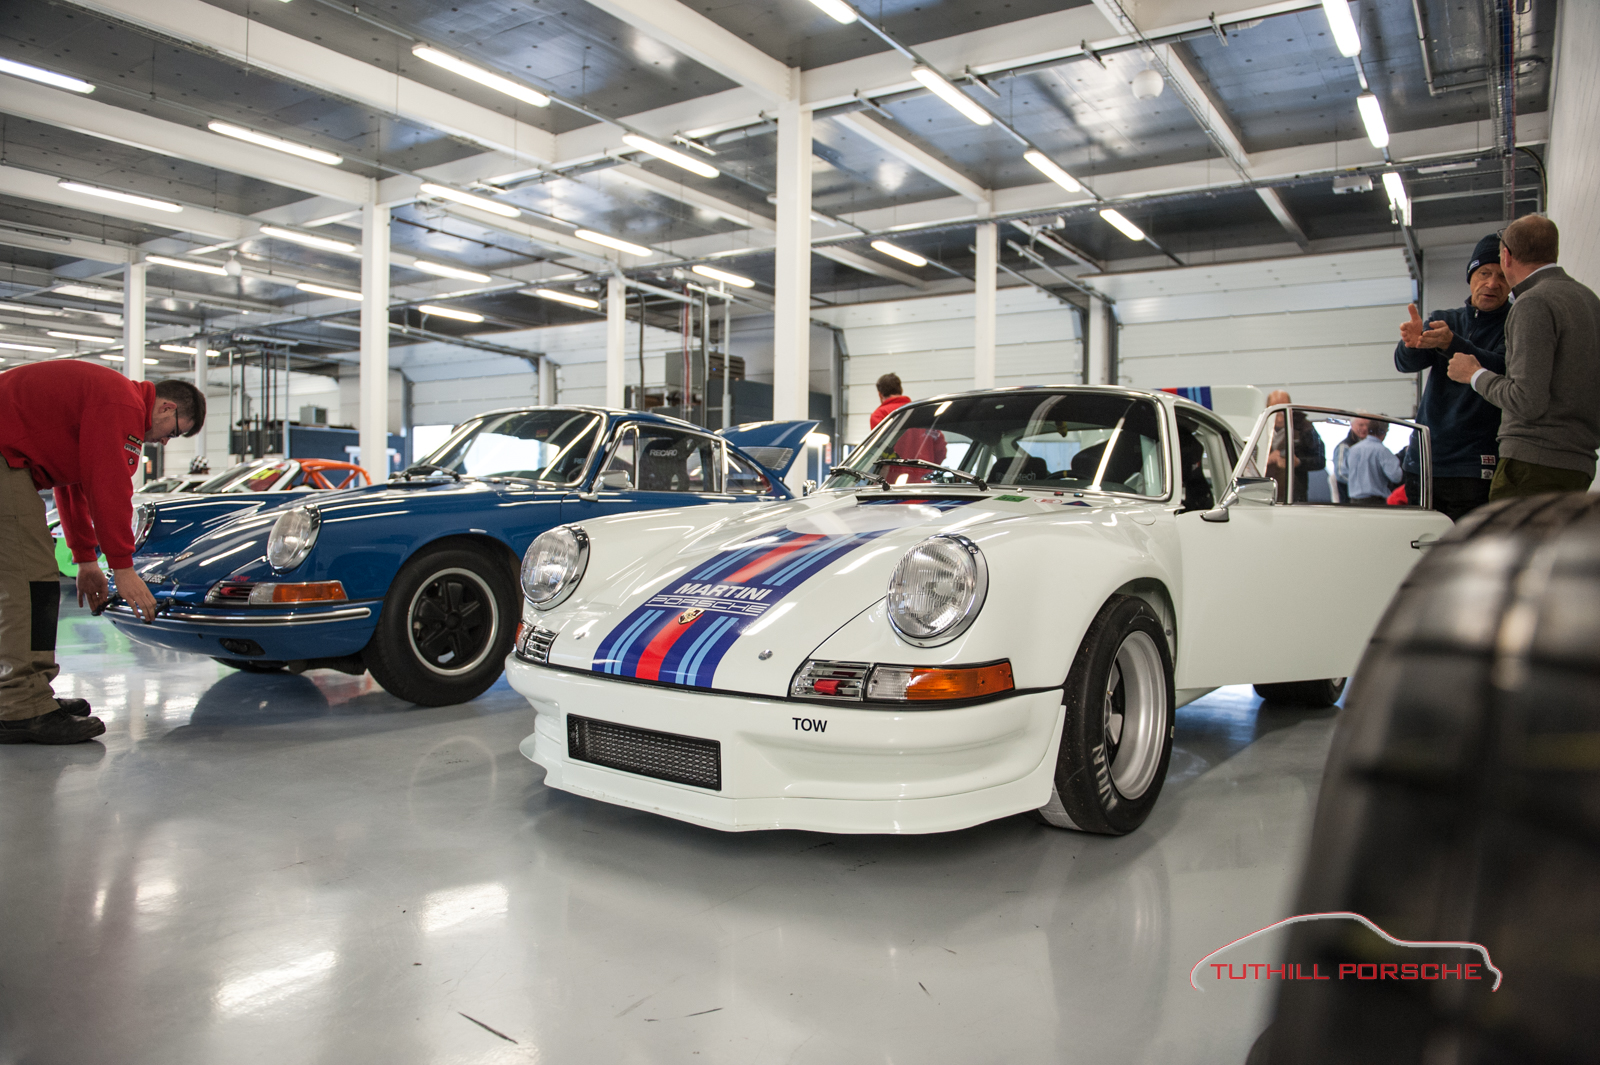 Tuthill Porsche 911 historic racing cars test at Silverstone